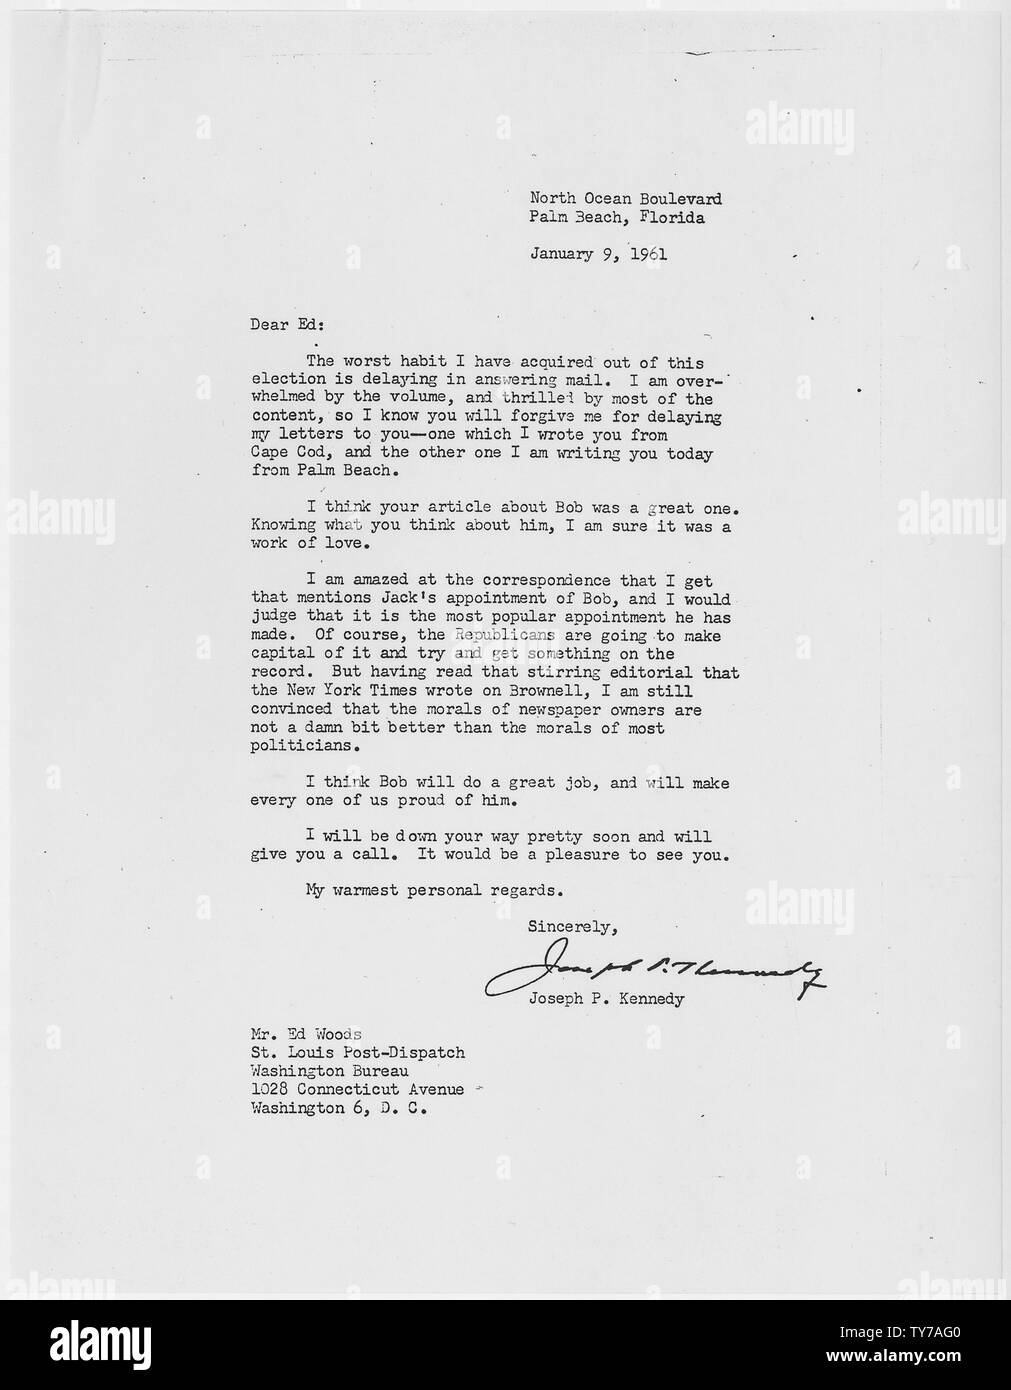 Joseph P. Kennedy Letter on Robert F. Kennedy's Appointment as Attorney General January 9, 1961; Scope and content:  Letter from Joseph P. Kennedy, Sr. to Ed Woods of the St. Louis Post Dispatch concerning Robert F. Kennedy's appointment as Attorney General of the United States. Stock Photo